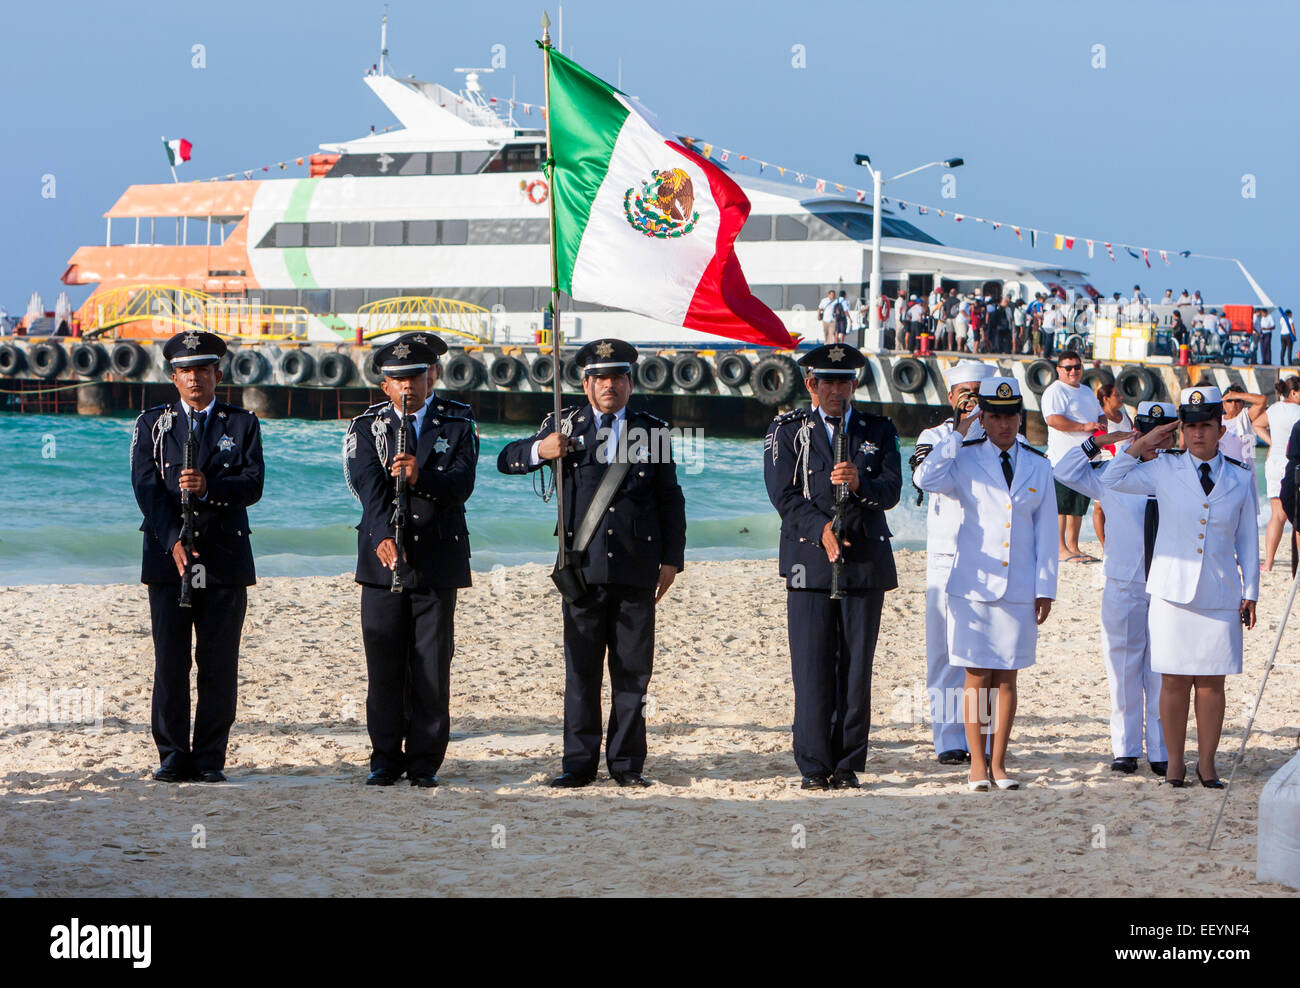 Celebration of the 70th Anniversary of the Founding of the Mexican Navy, Playa del Carmen, June 1, 2012.  Yucatan, Mexico. Stock Photo